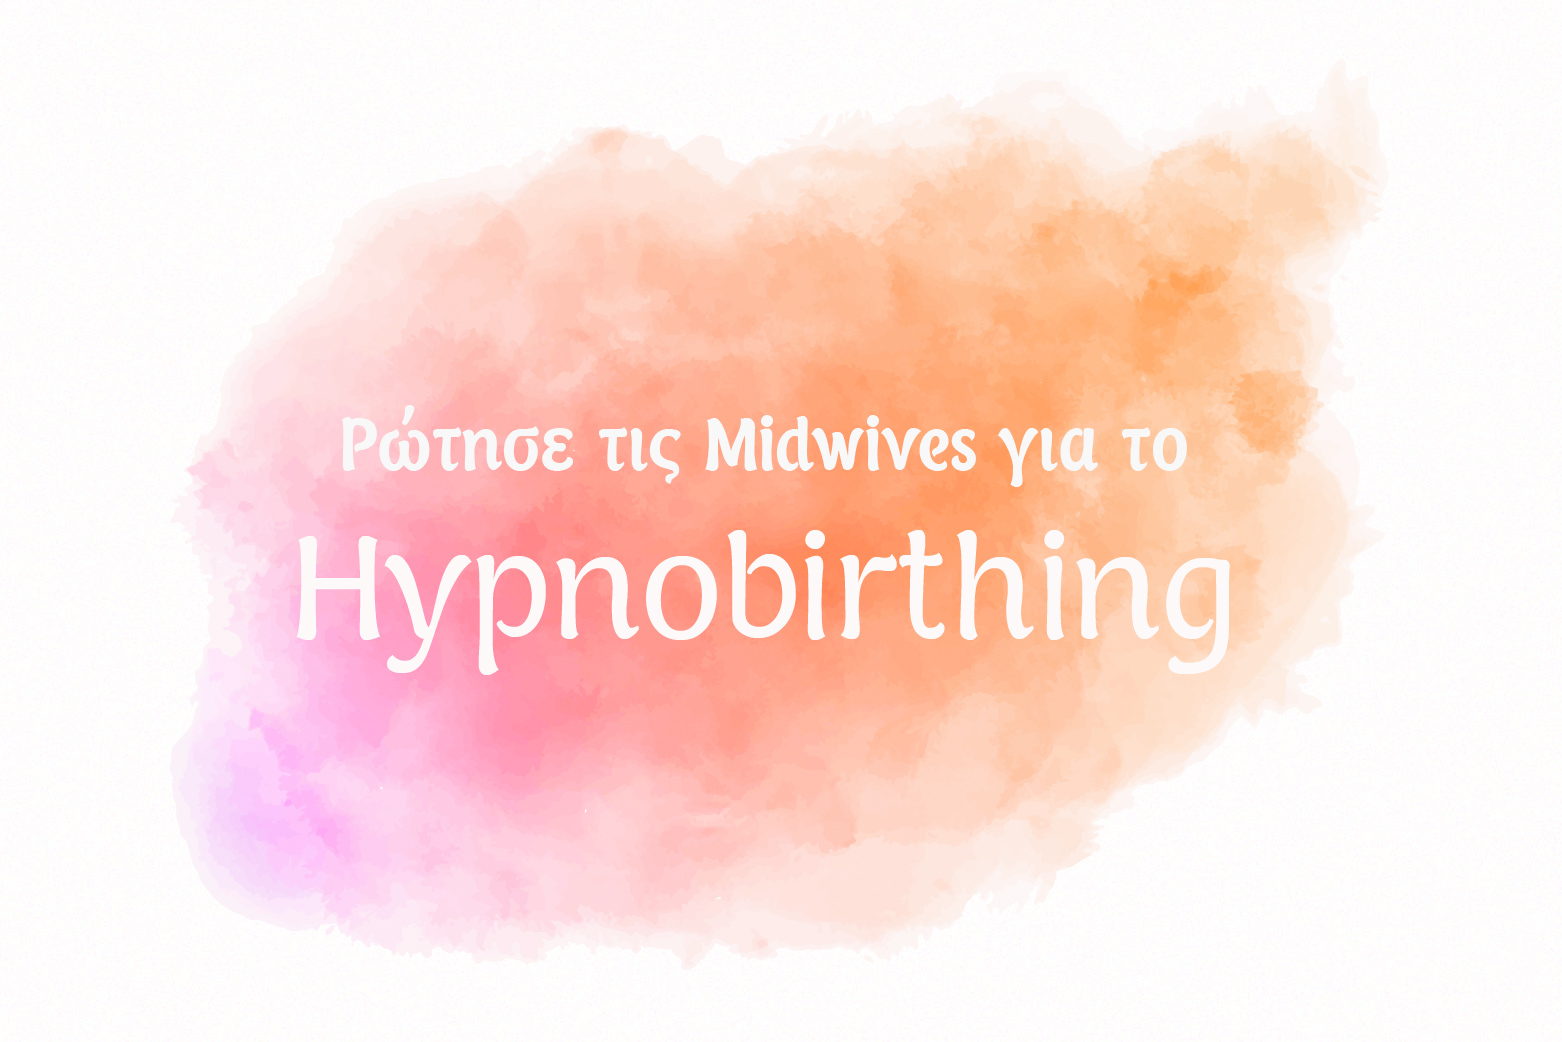 ASK THE MIDWIVES HYPNOBIRTHING